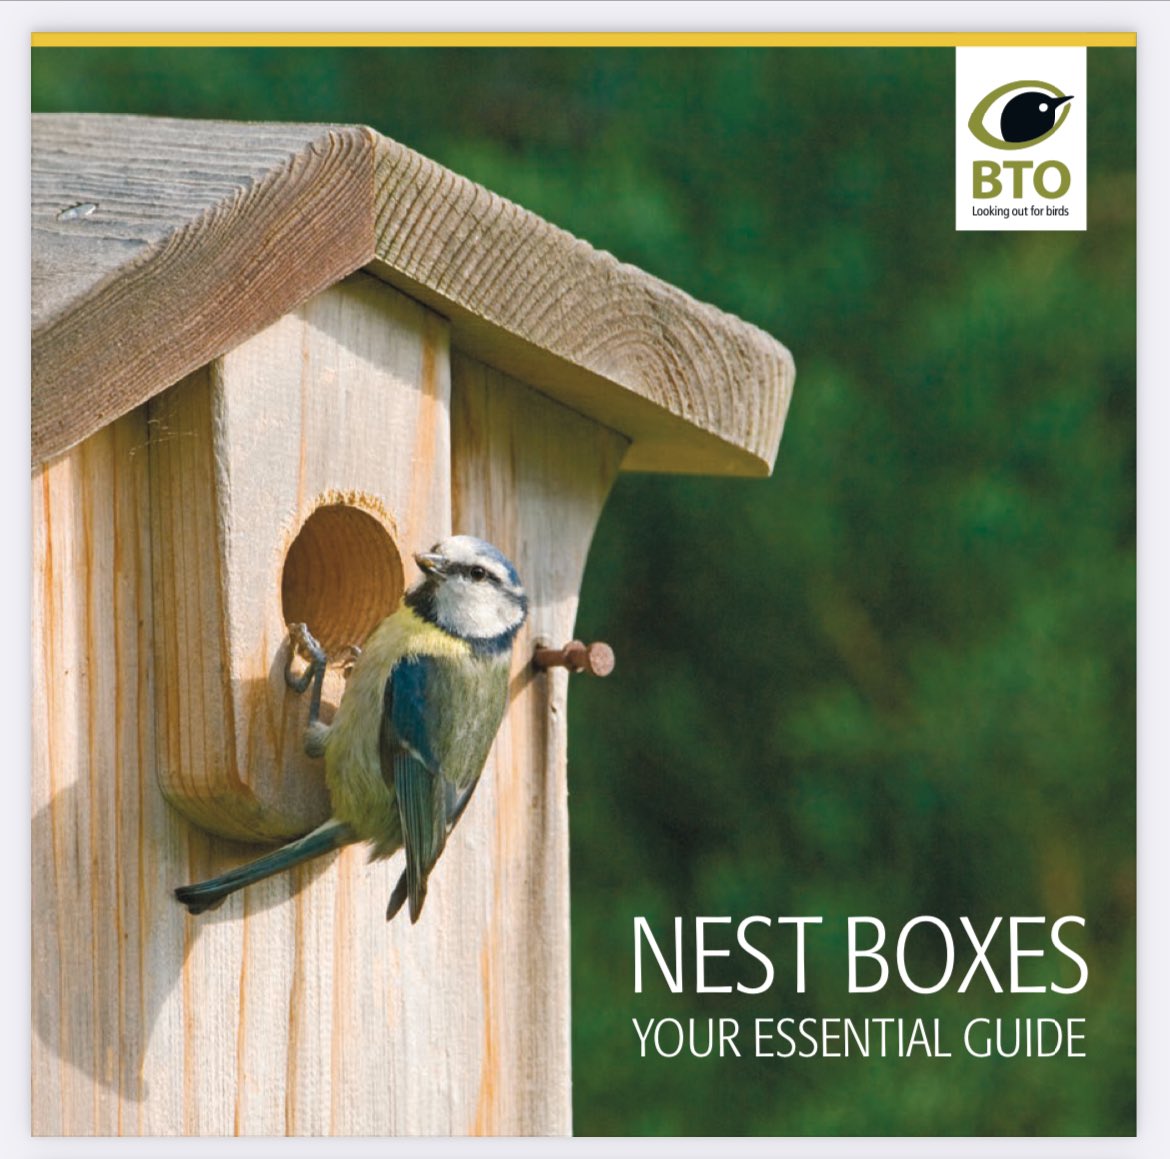 It’s National nest box week! Whether you build 1 or buy a premade one, February is the perfect time to provide birds with a home for the breeding season. Positioning and box type will vary on the species you want to attract, here is a guide to help. @_BTO bto.org/sites/default/…